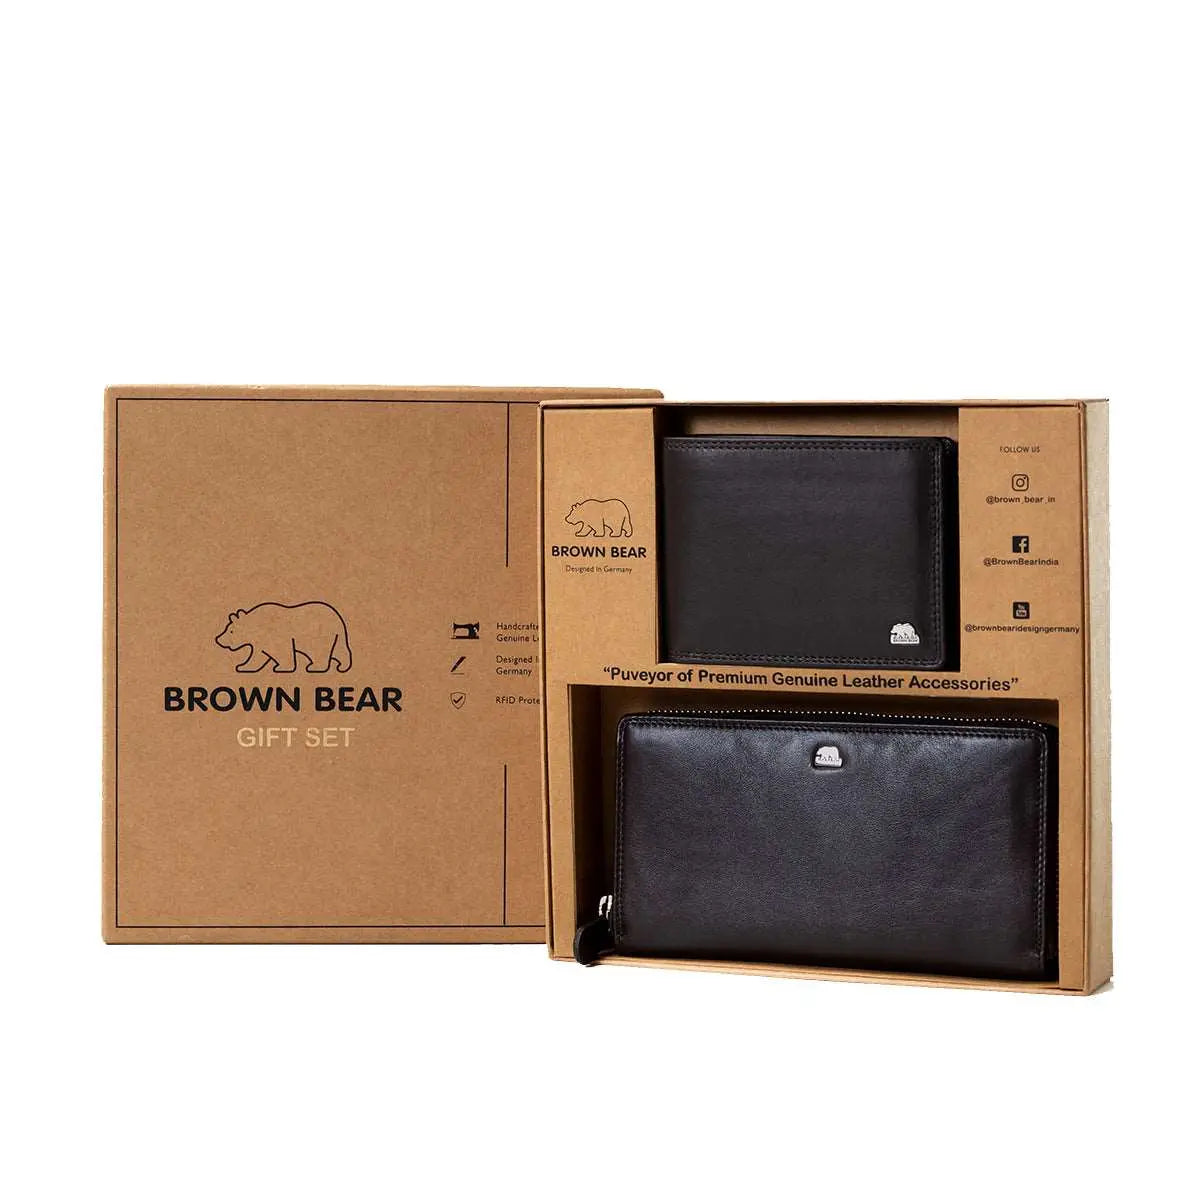 Gift Set - Classically Coordinated: His & Hers Wallet Gift Set - Brown Bear